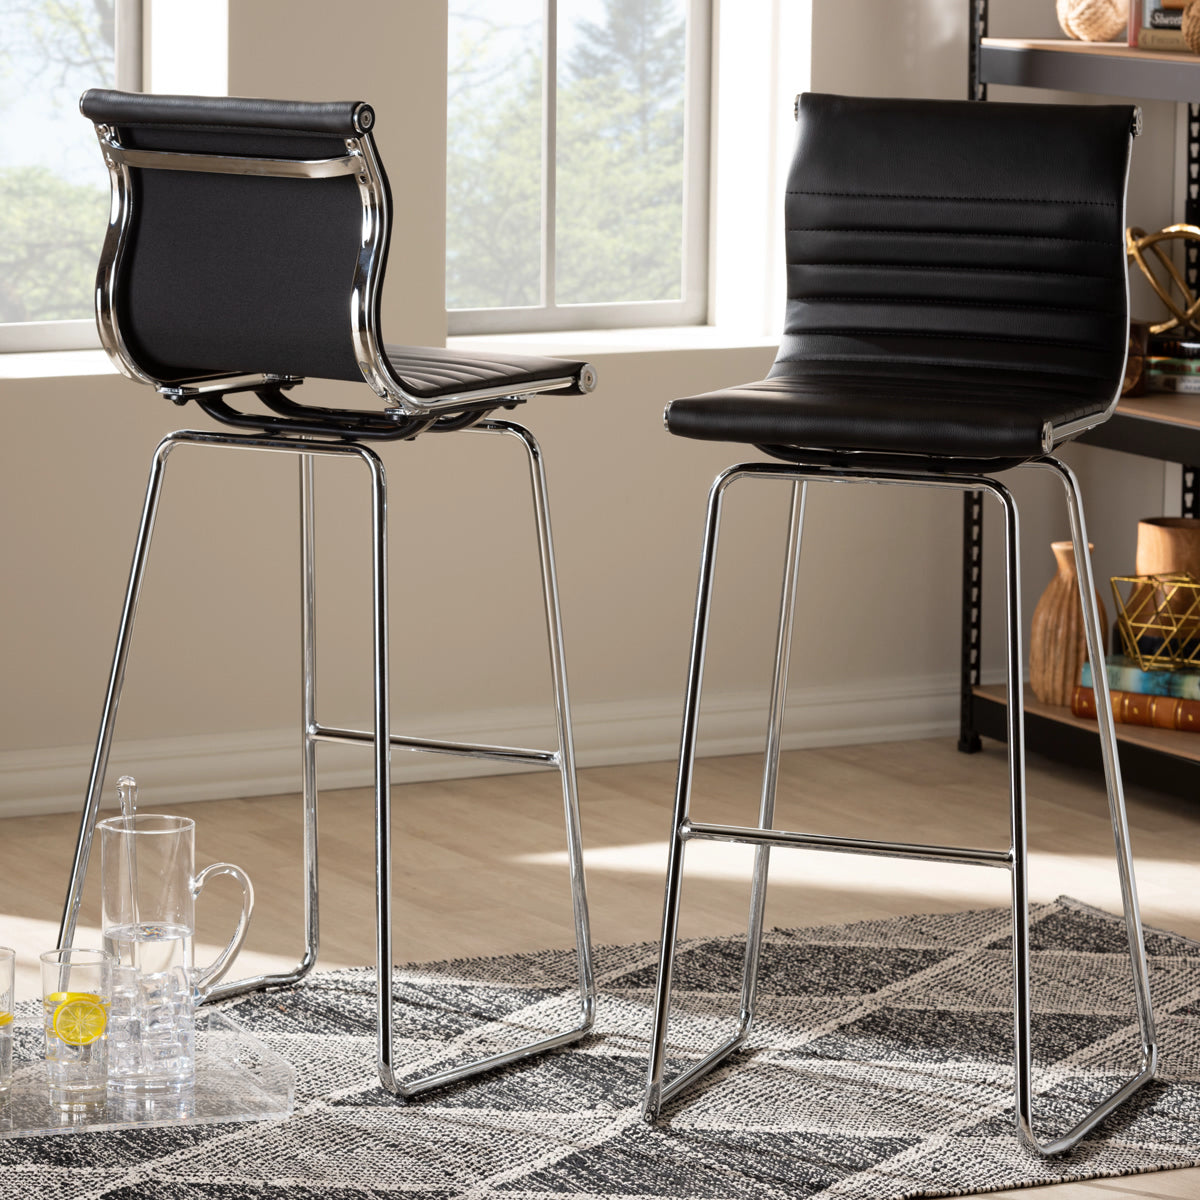 Baxton Studio Giorgio Modern and Contemporary Black Faux Leather Upholstered Chrome-Finished Steel Bar Stool Set Baxton Studio-Bar Stools-Minimal And Modern - 5